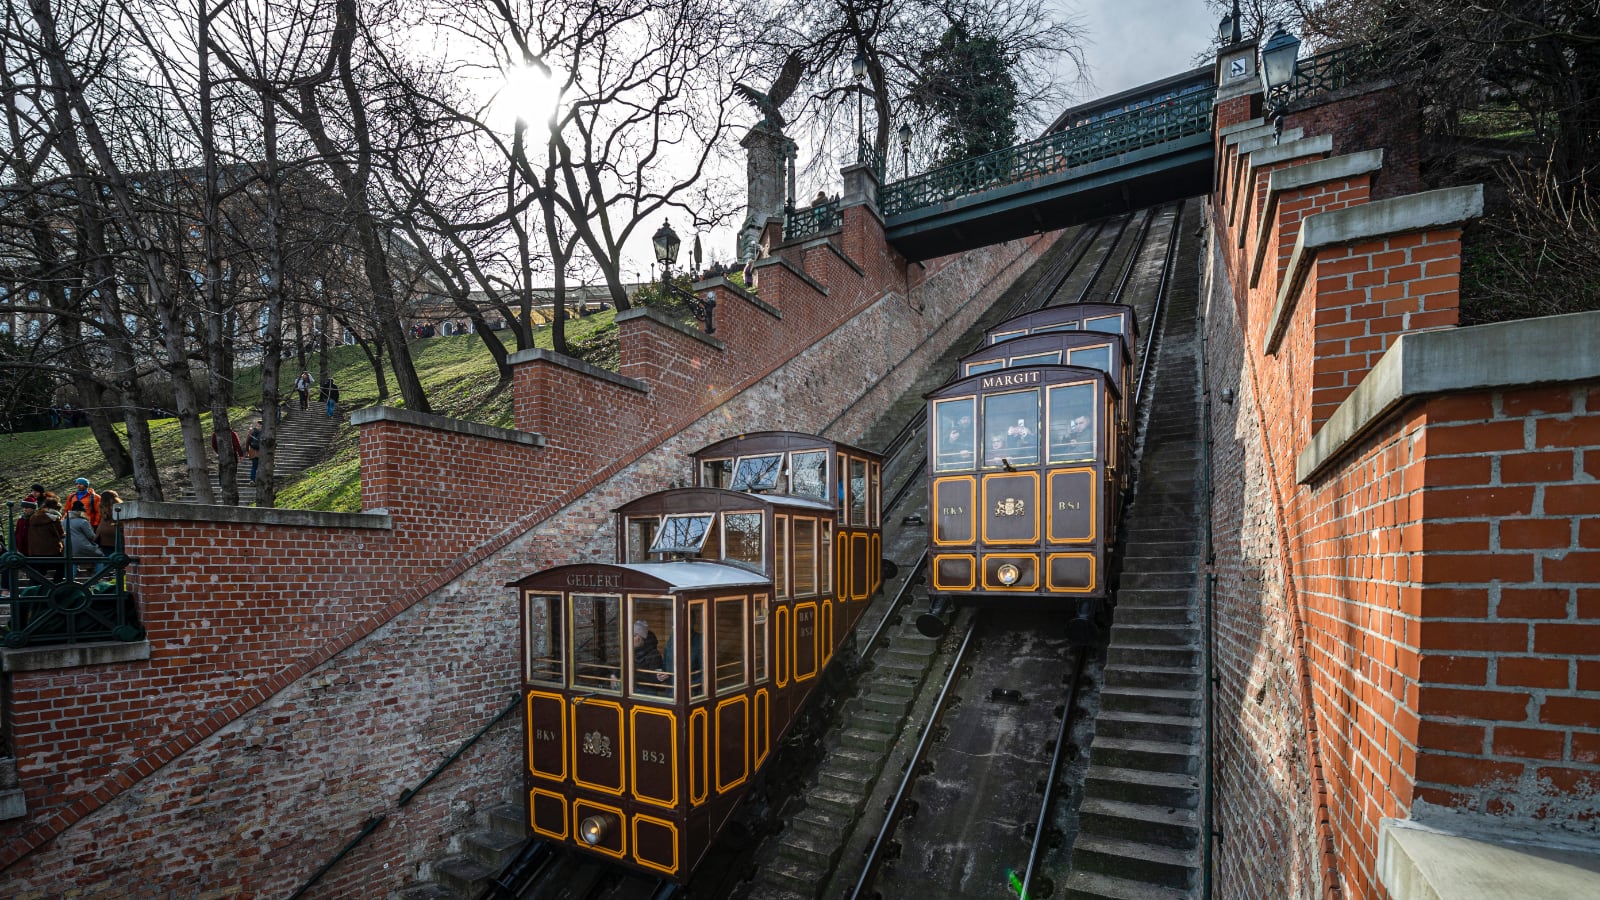 The Buda Castle Funicular, a restored nostalgic ride from the 19th century with an exhilarating panoramic view of Pest.